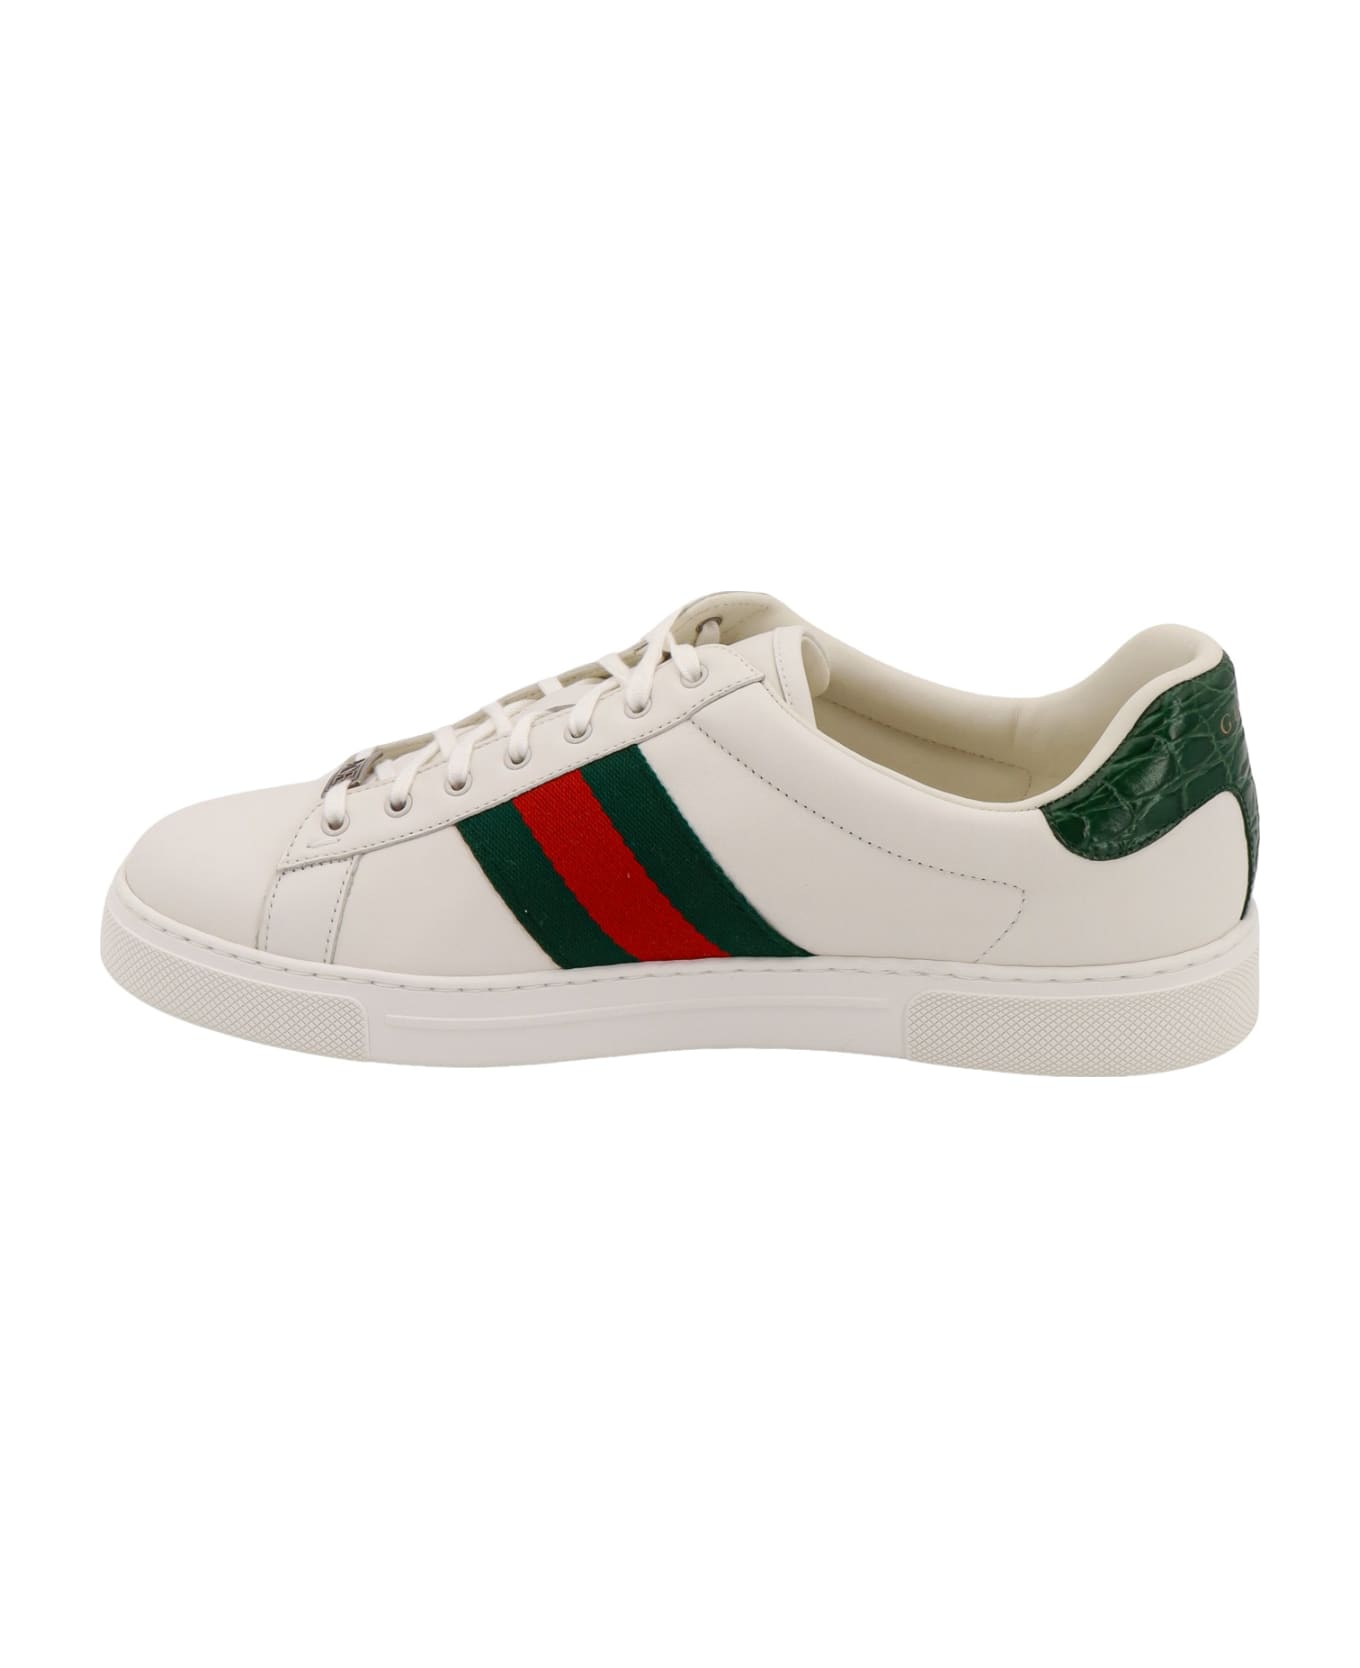 Gucci Ace Sneakers - White スニーカー